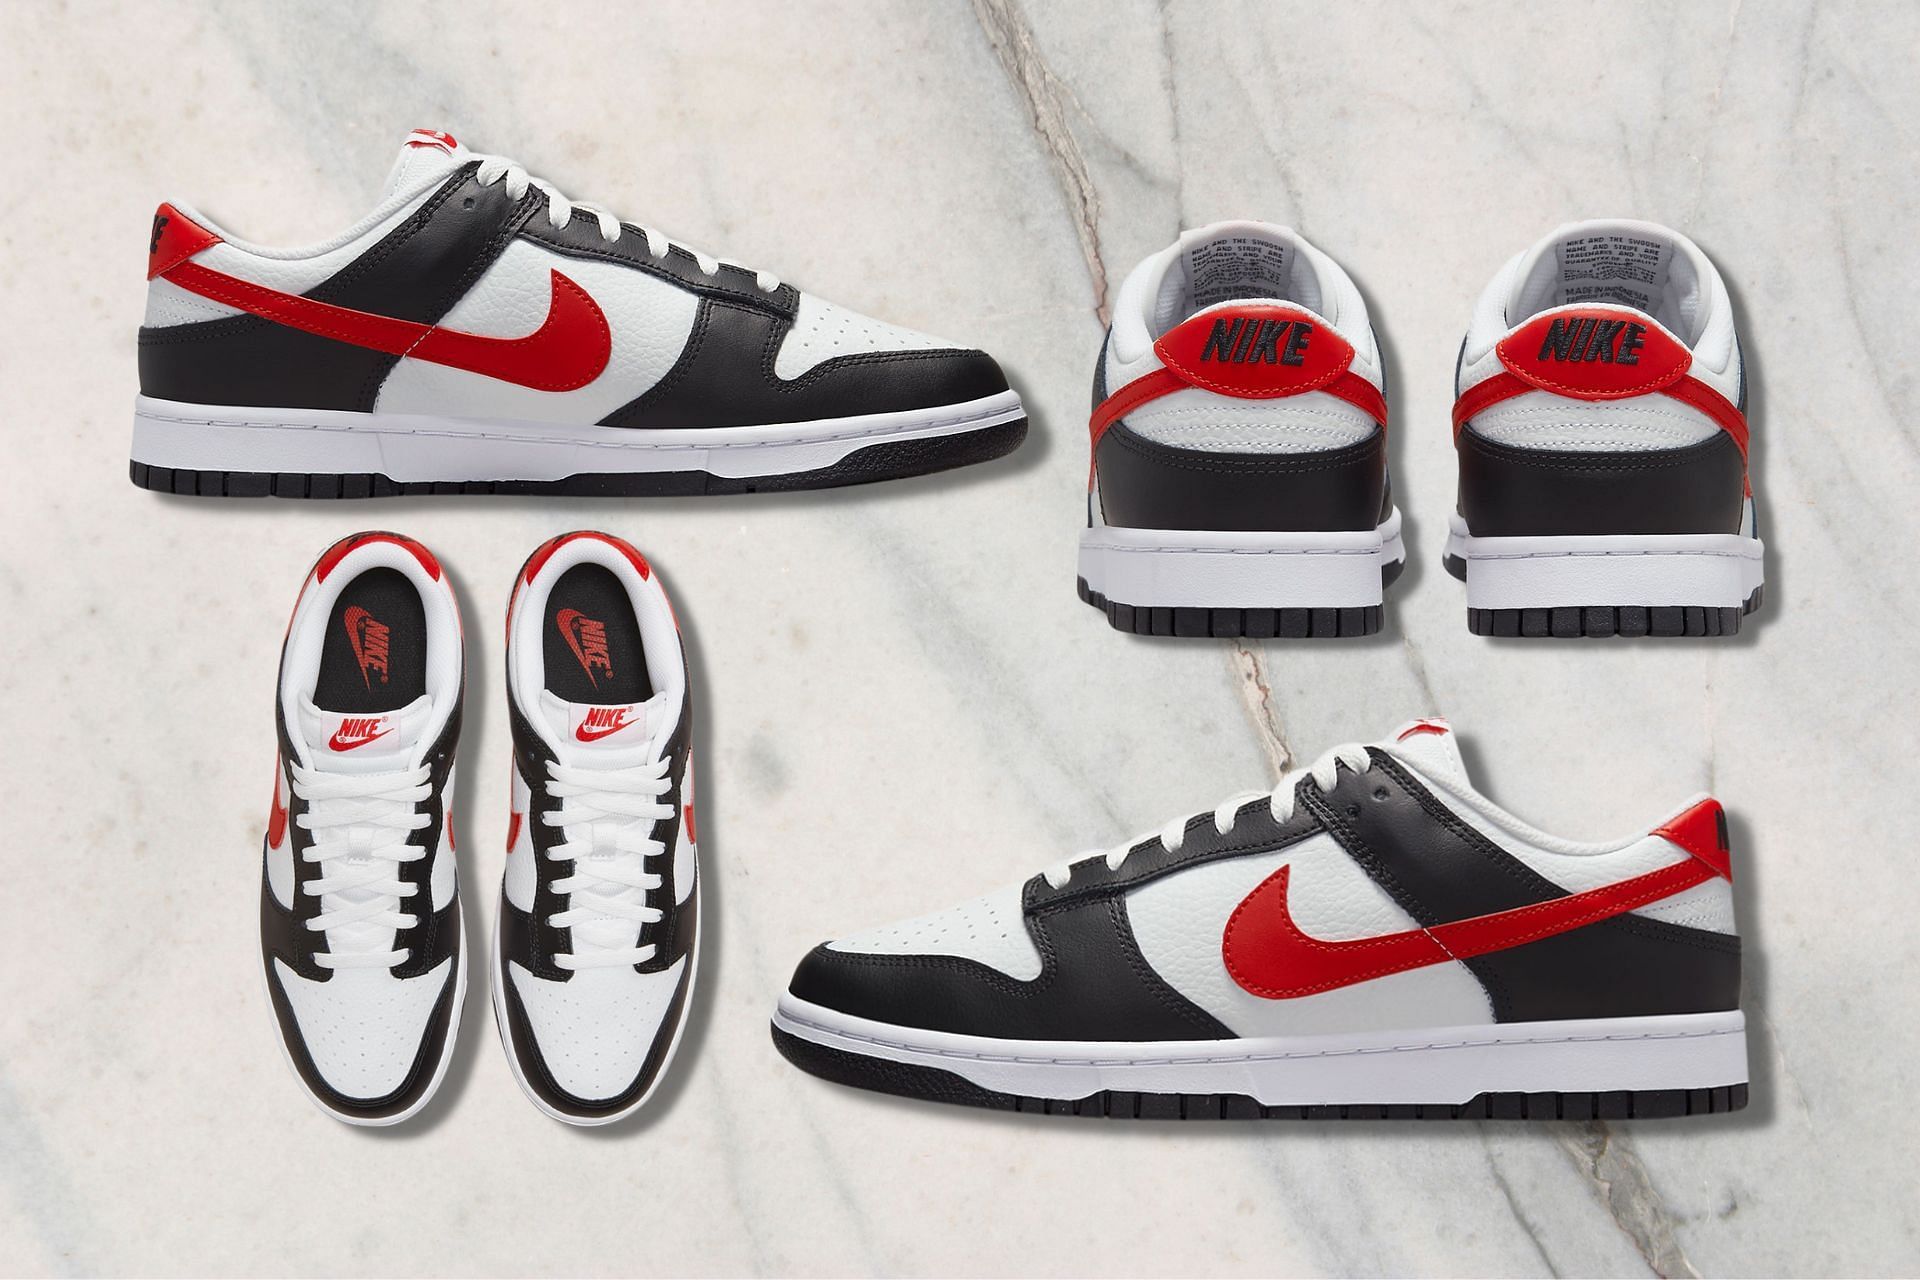 Upcoming Nike Dunk Low Panda makeover, which has been tweaked with Red swooshes (Image via Sportskeeda)